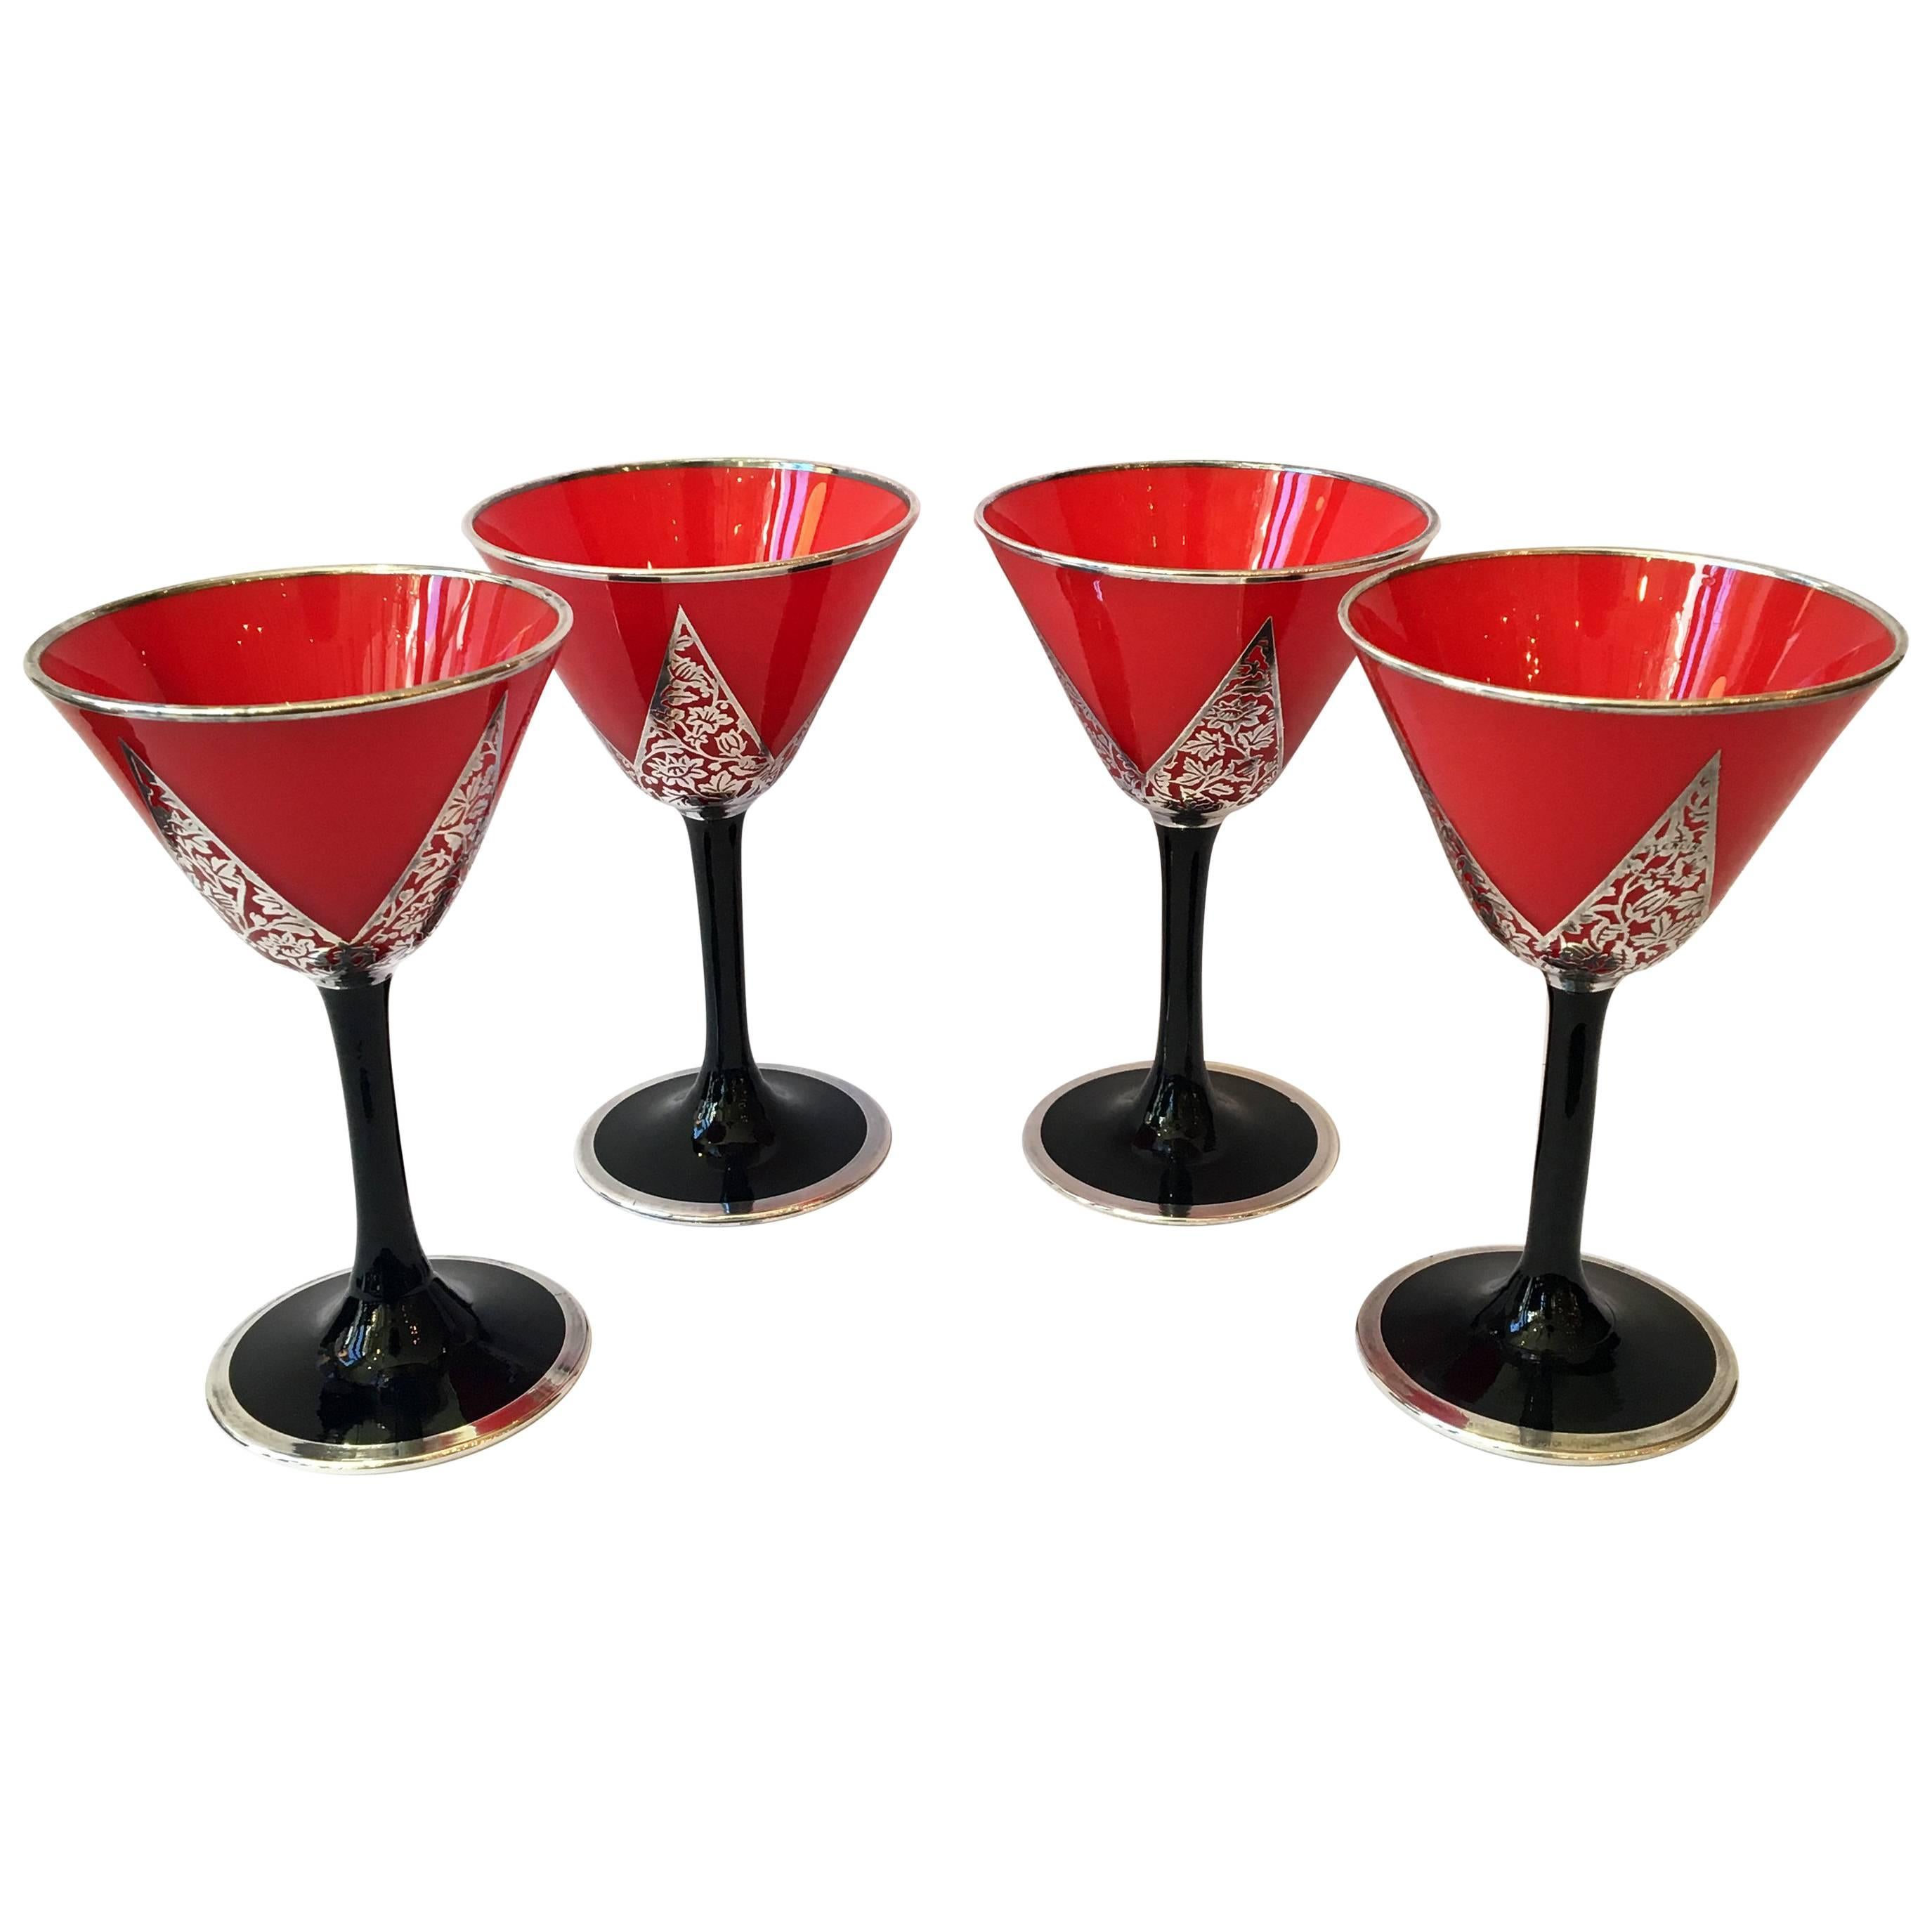 Early 20th Century Art Deco Cocktail Glasses